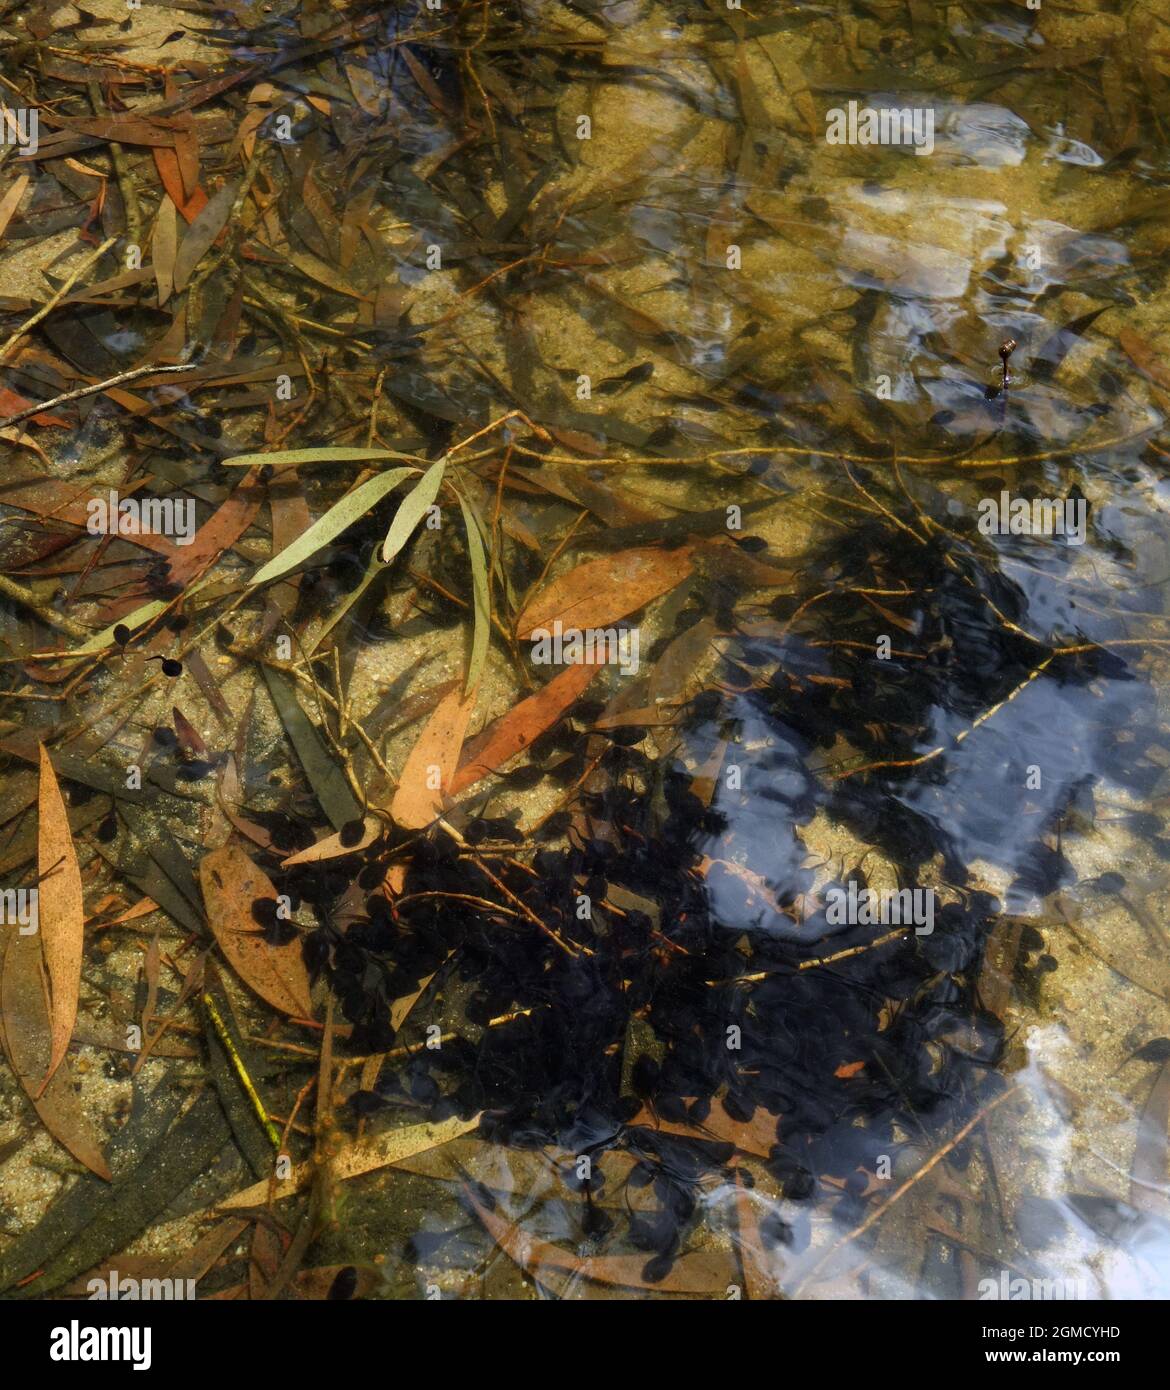 Aggregation of toxic invasive cane toad (Rhinella marinus) tadpoles, Butterfly Falls Limmen National Park, Northern Territory, Australia Stock Photo